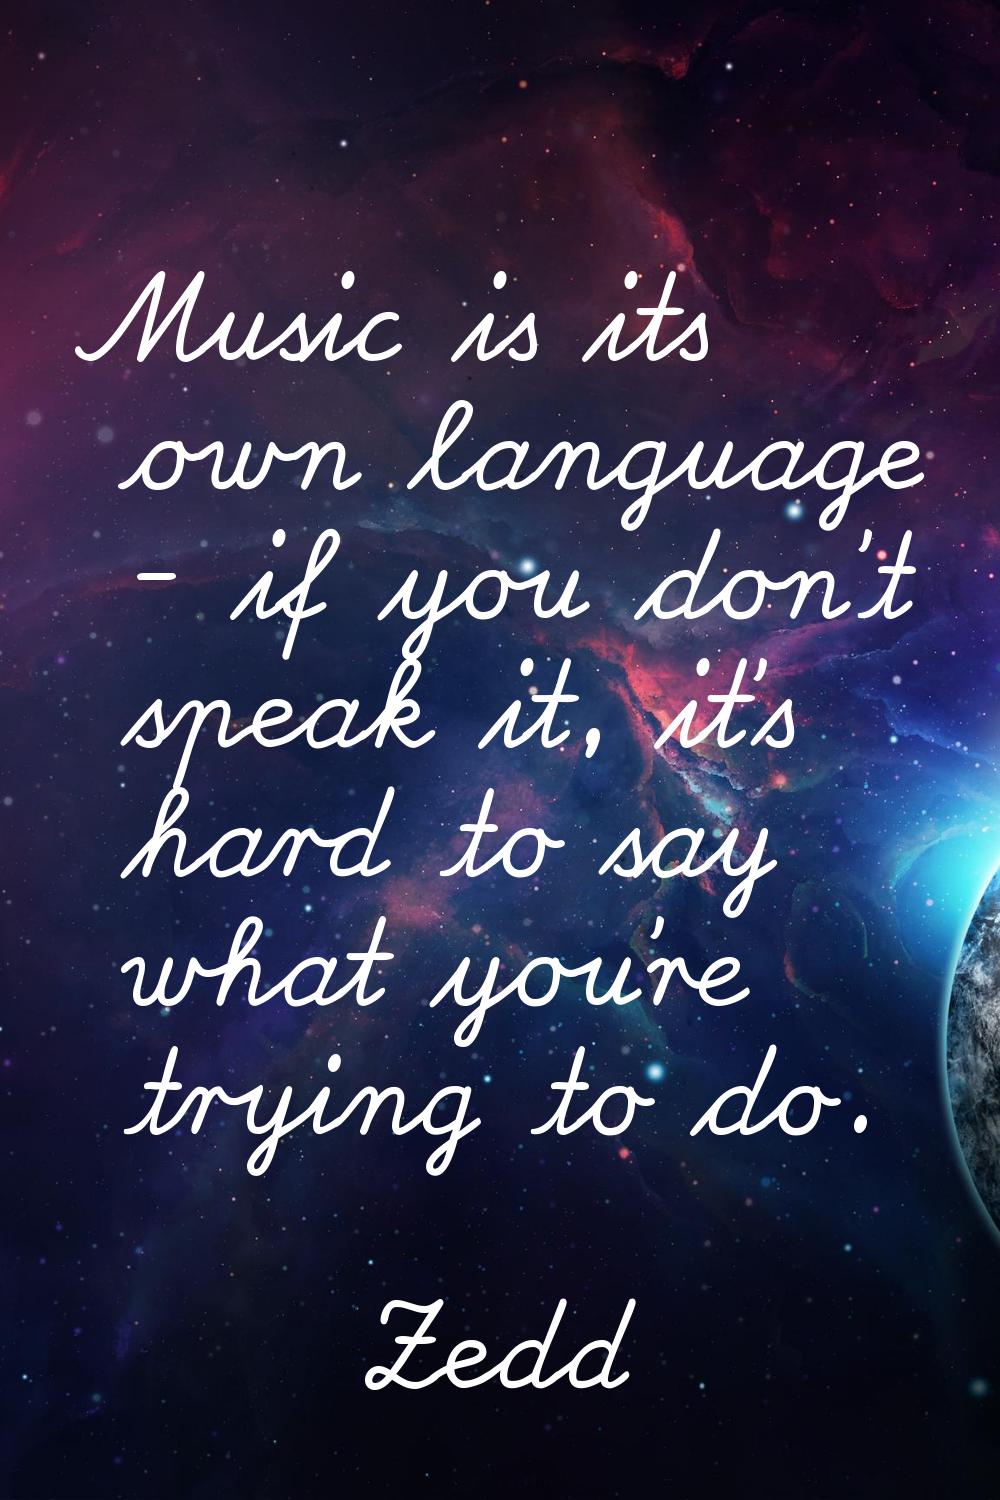 Music is its own language - if you don't speak it, it's hard to say what you're trying to do.